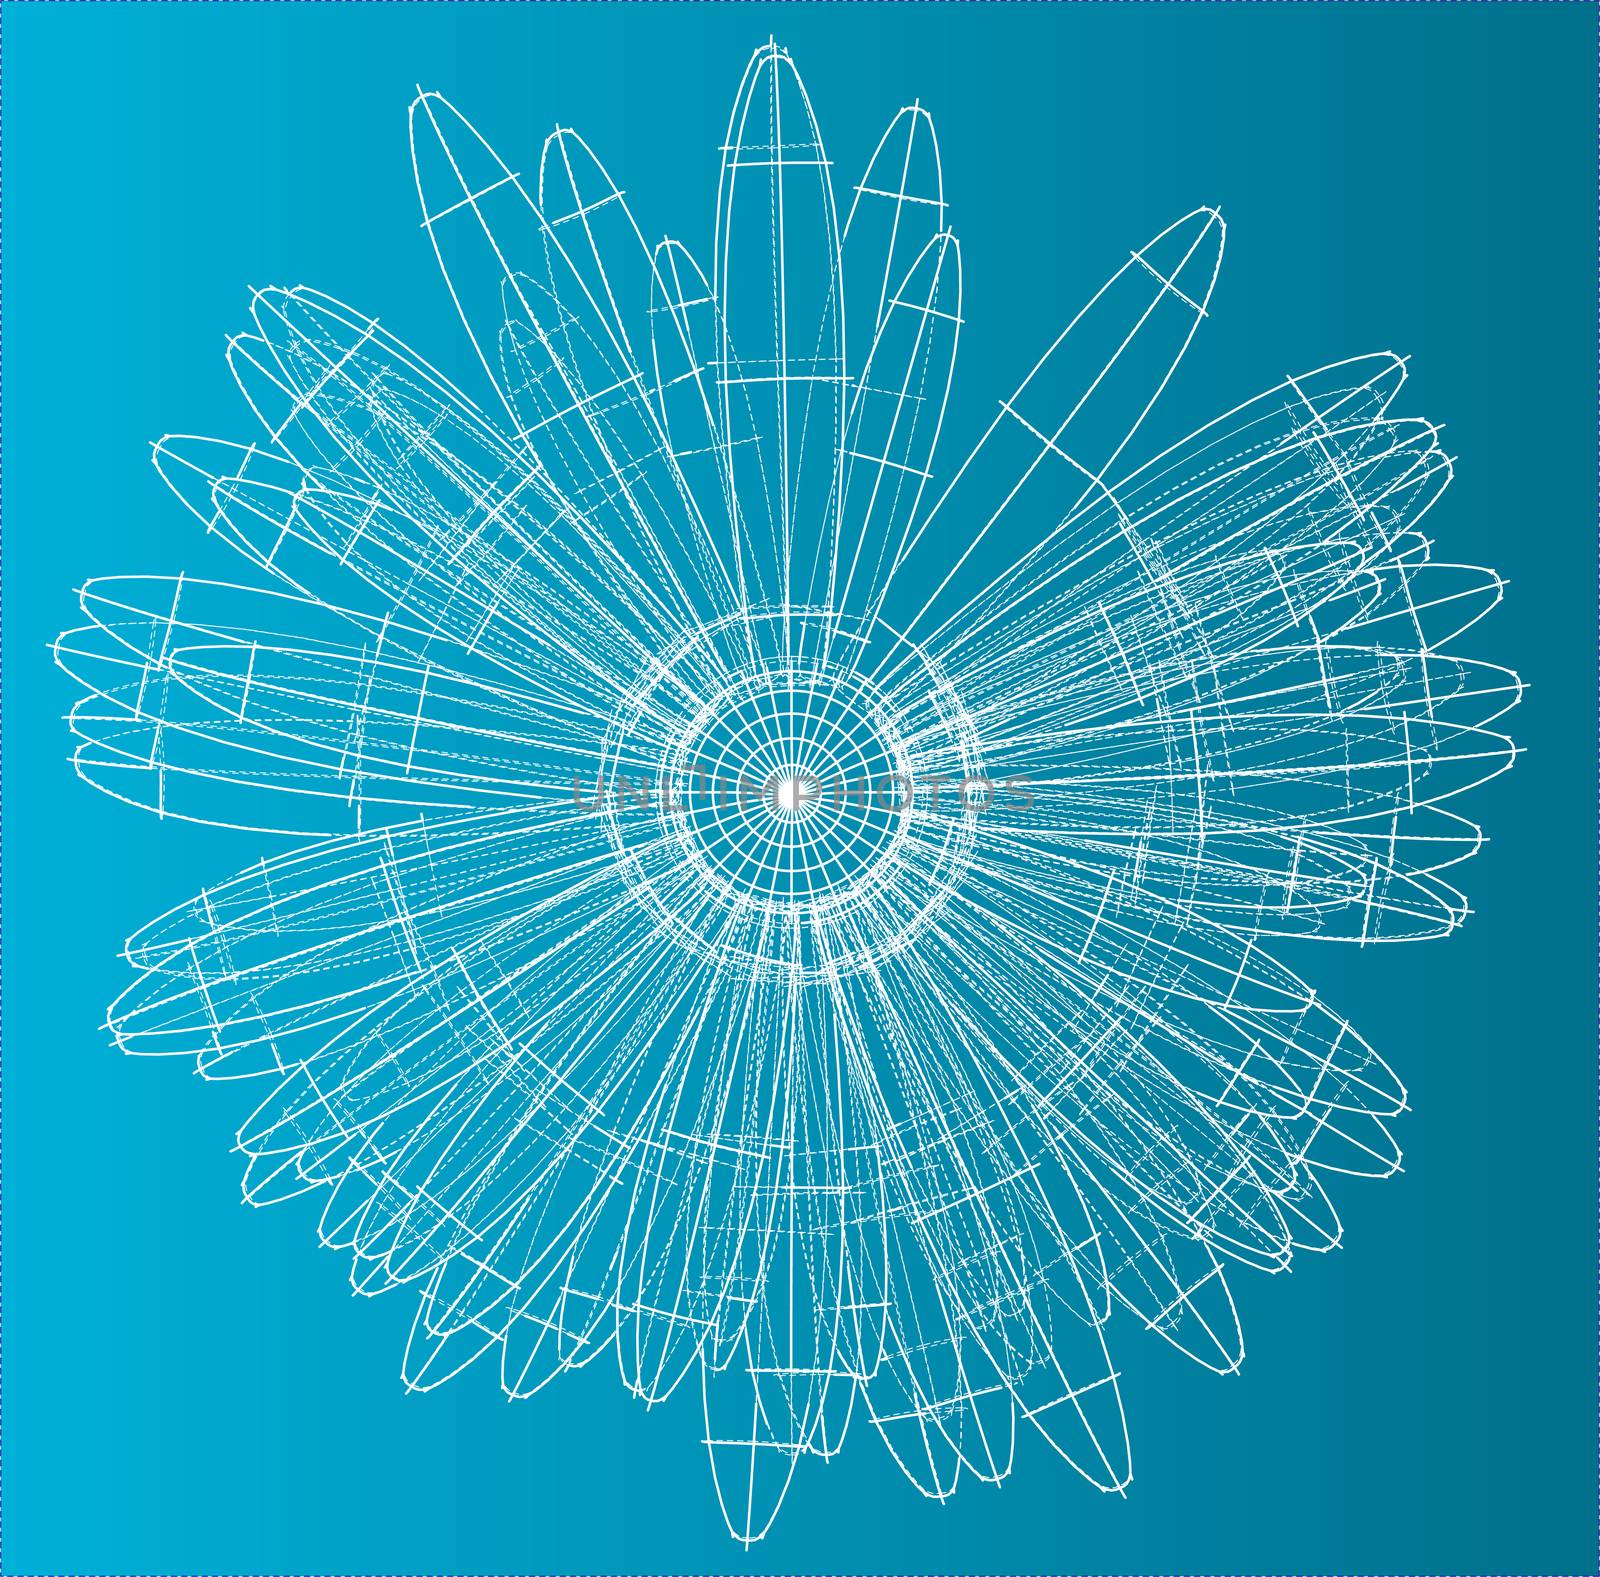 3d illustration of flower. Wire frame style on blue background